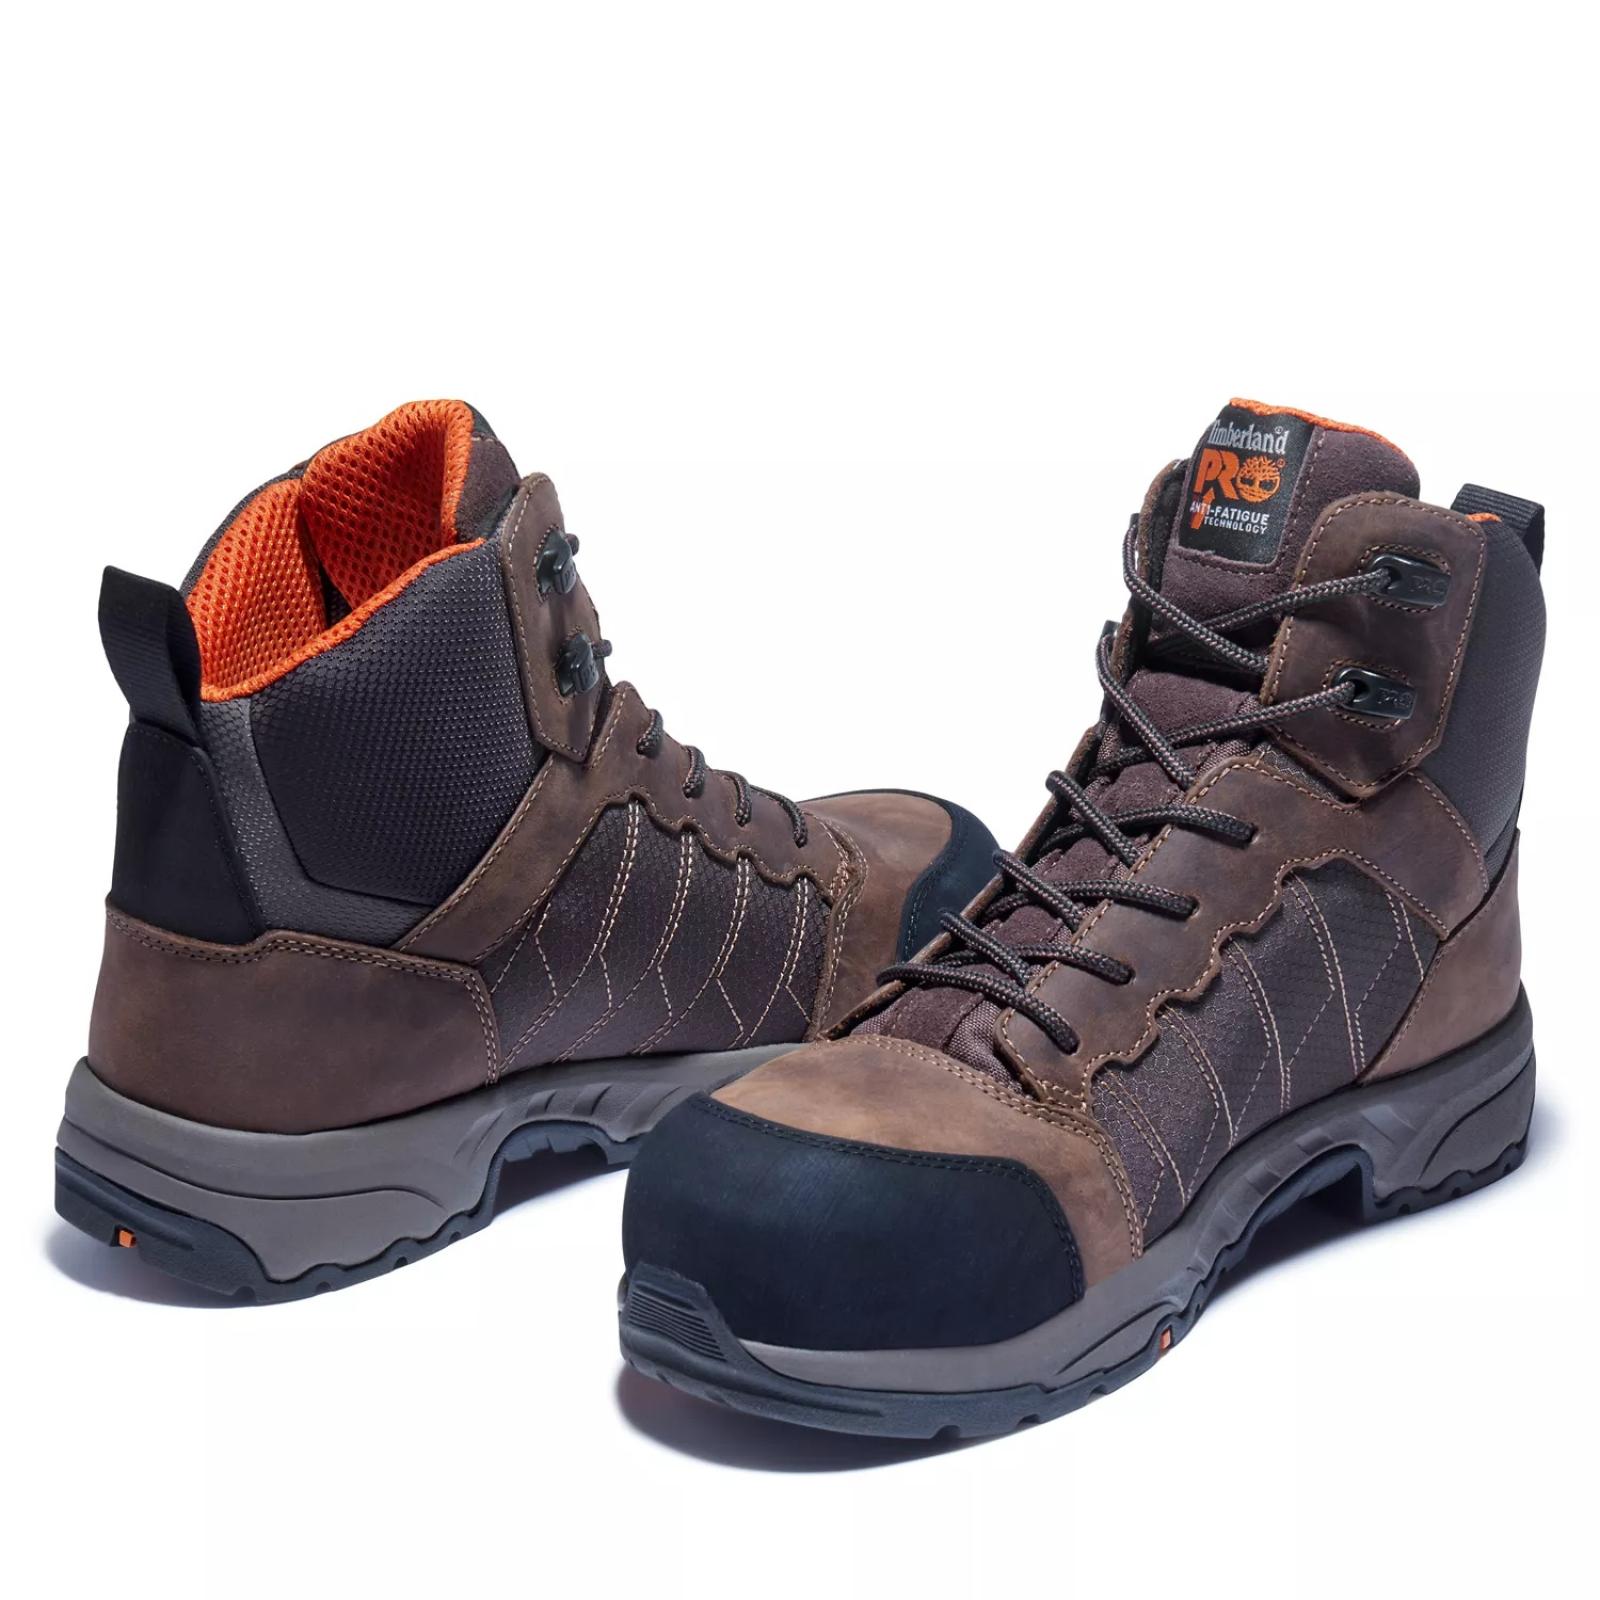 Timberland PRO Men's Payload 6" Composite Toe Work Boot